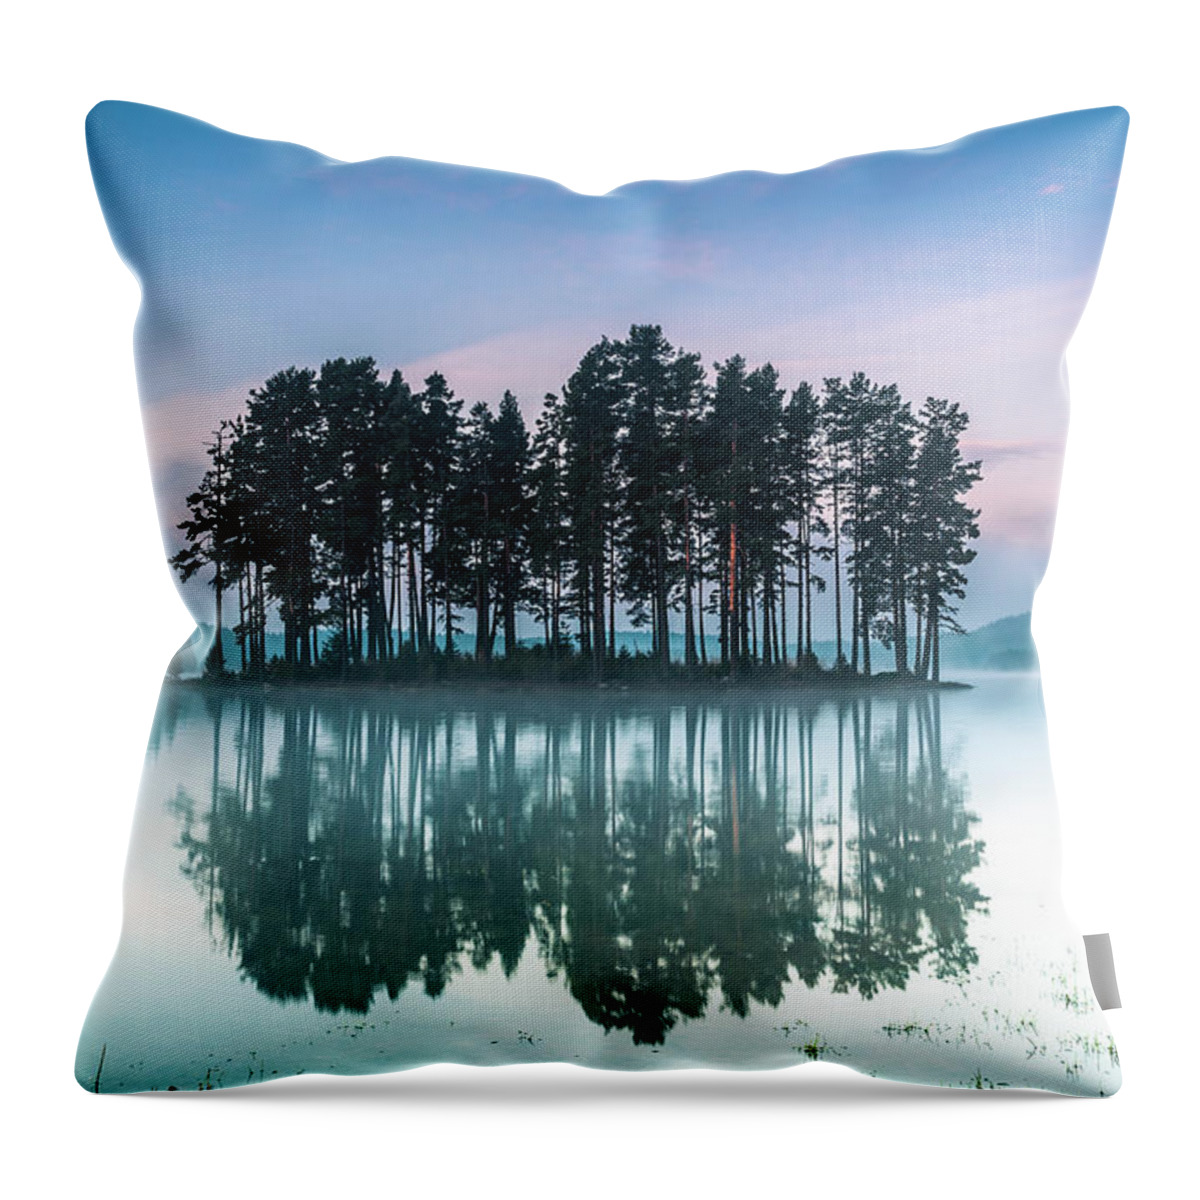 Mountain Throw Pillow featuring the photograph Island Of the Day Before by Evgeni Dinev